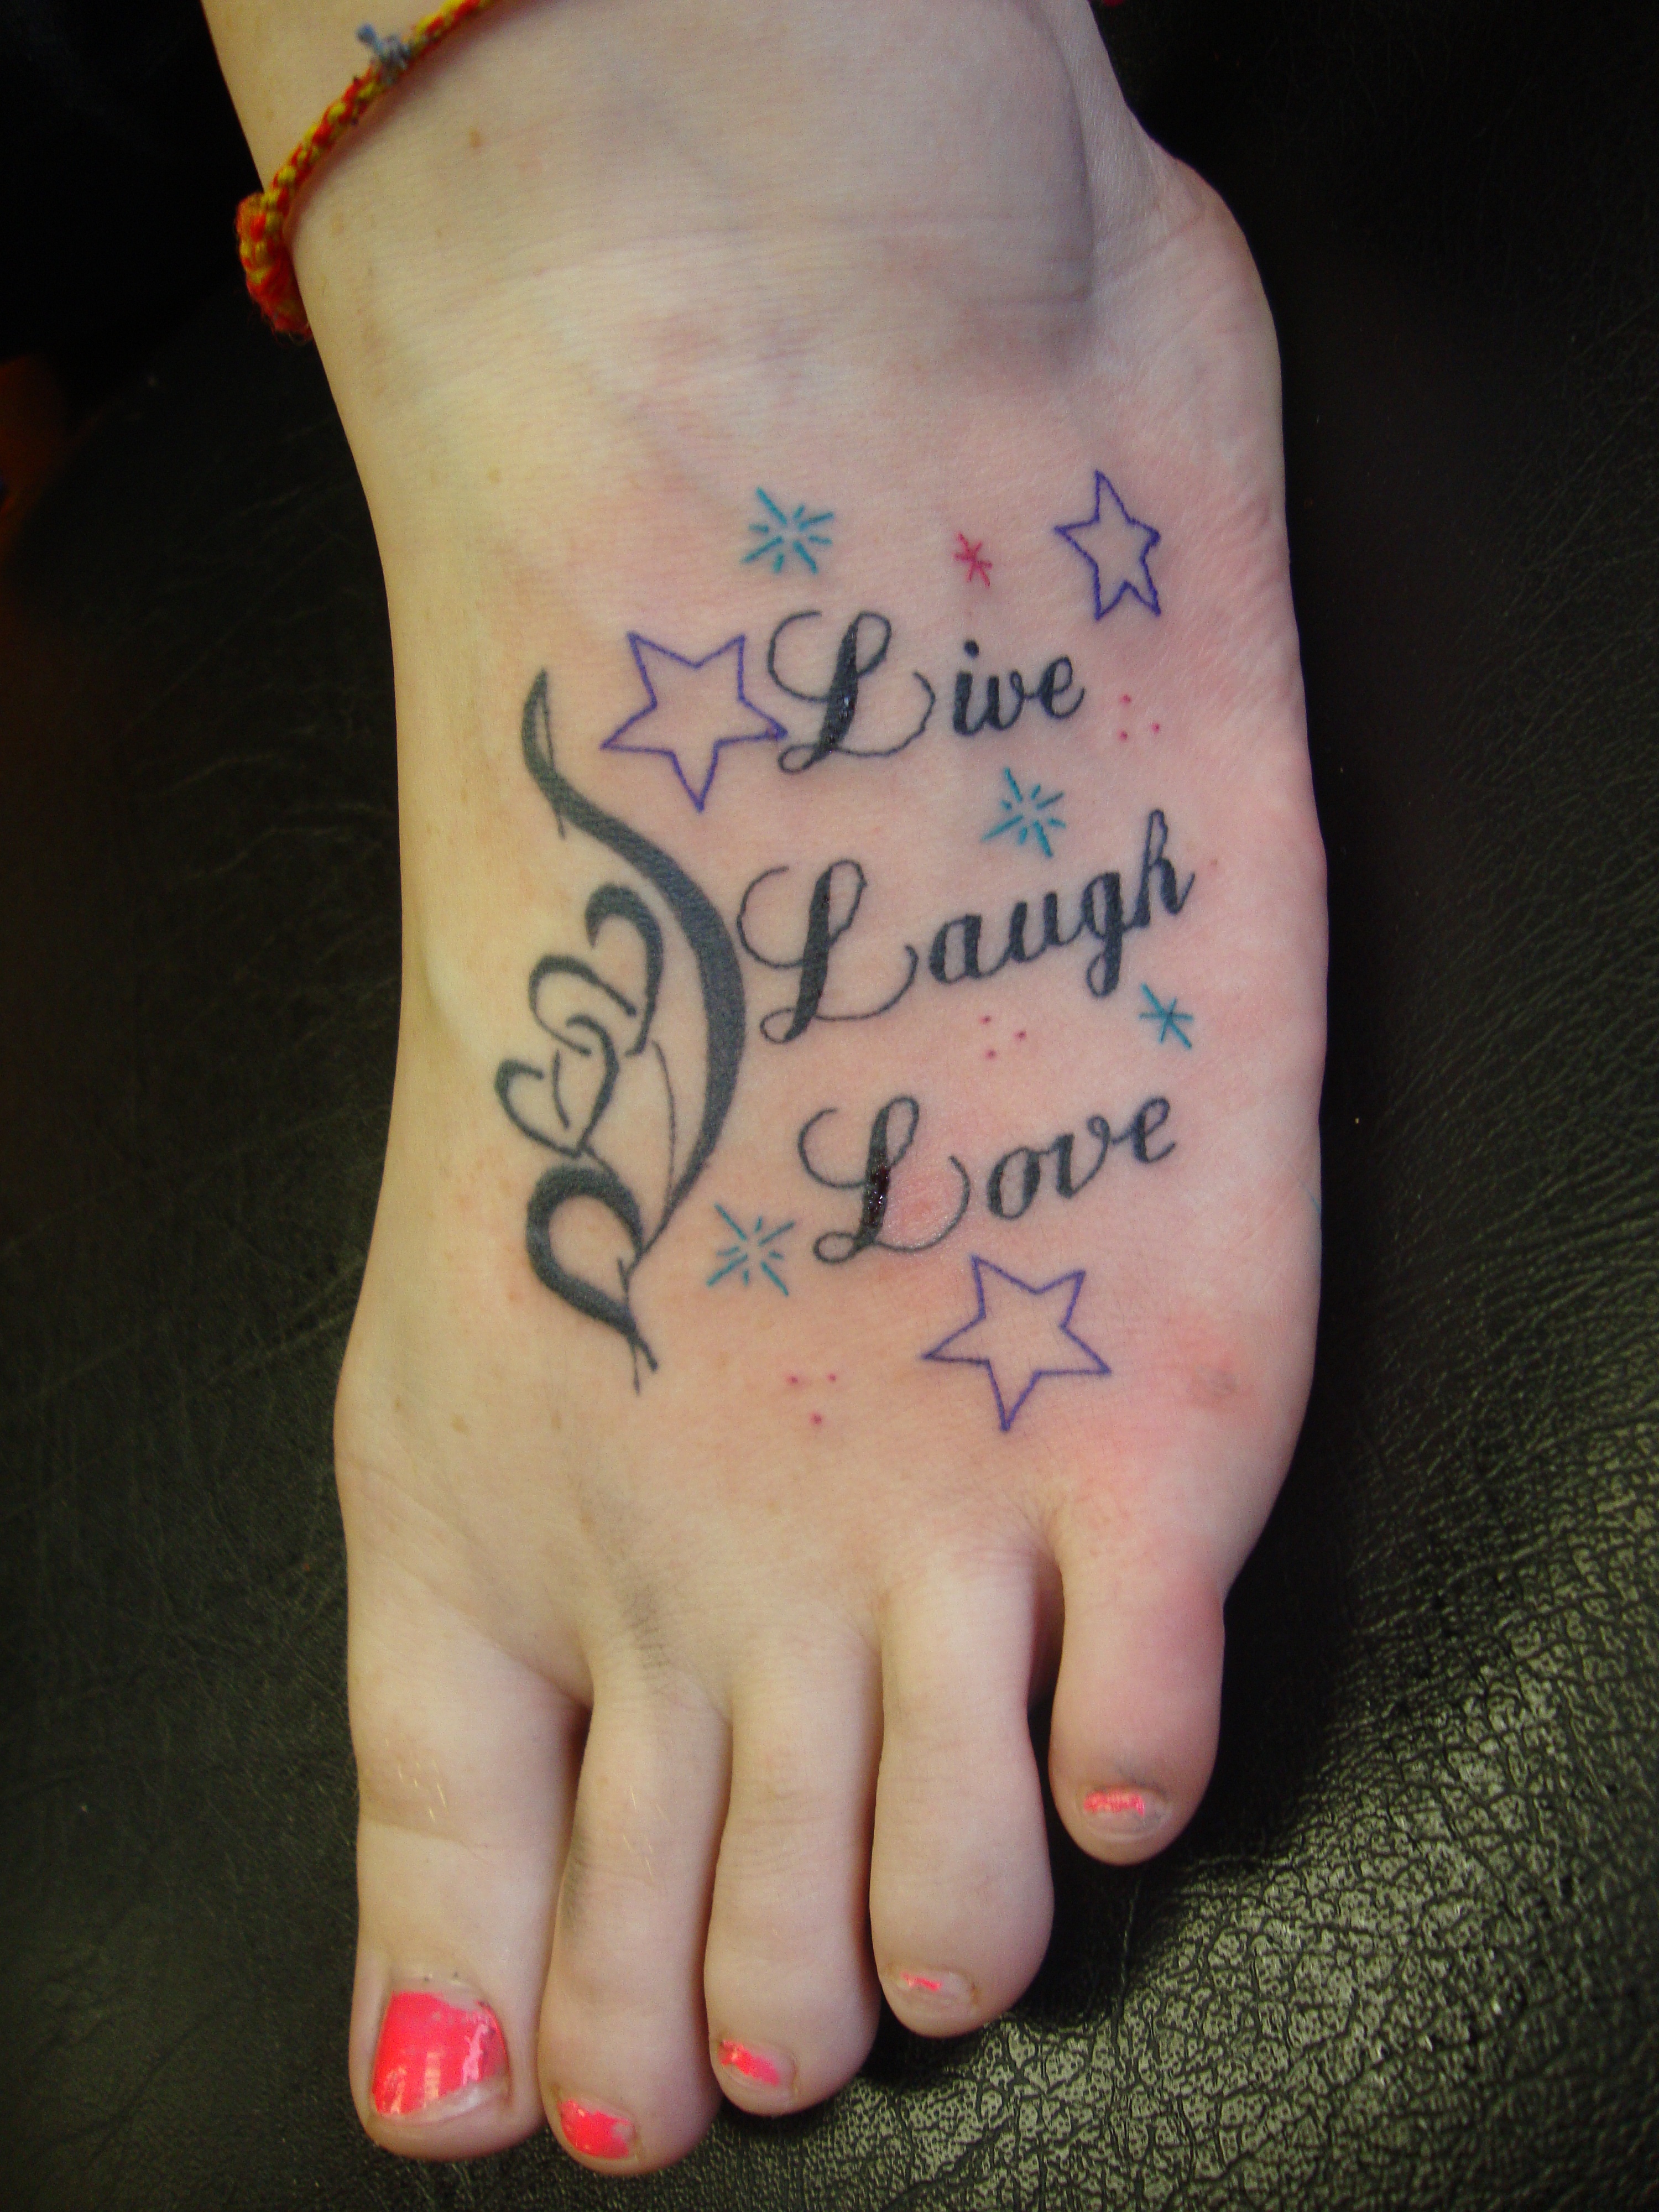 Live Laugh Love Tattoos Designs, Ideas and Meaning | Tattoos For You